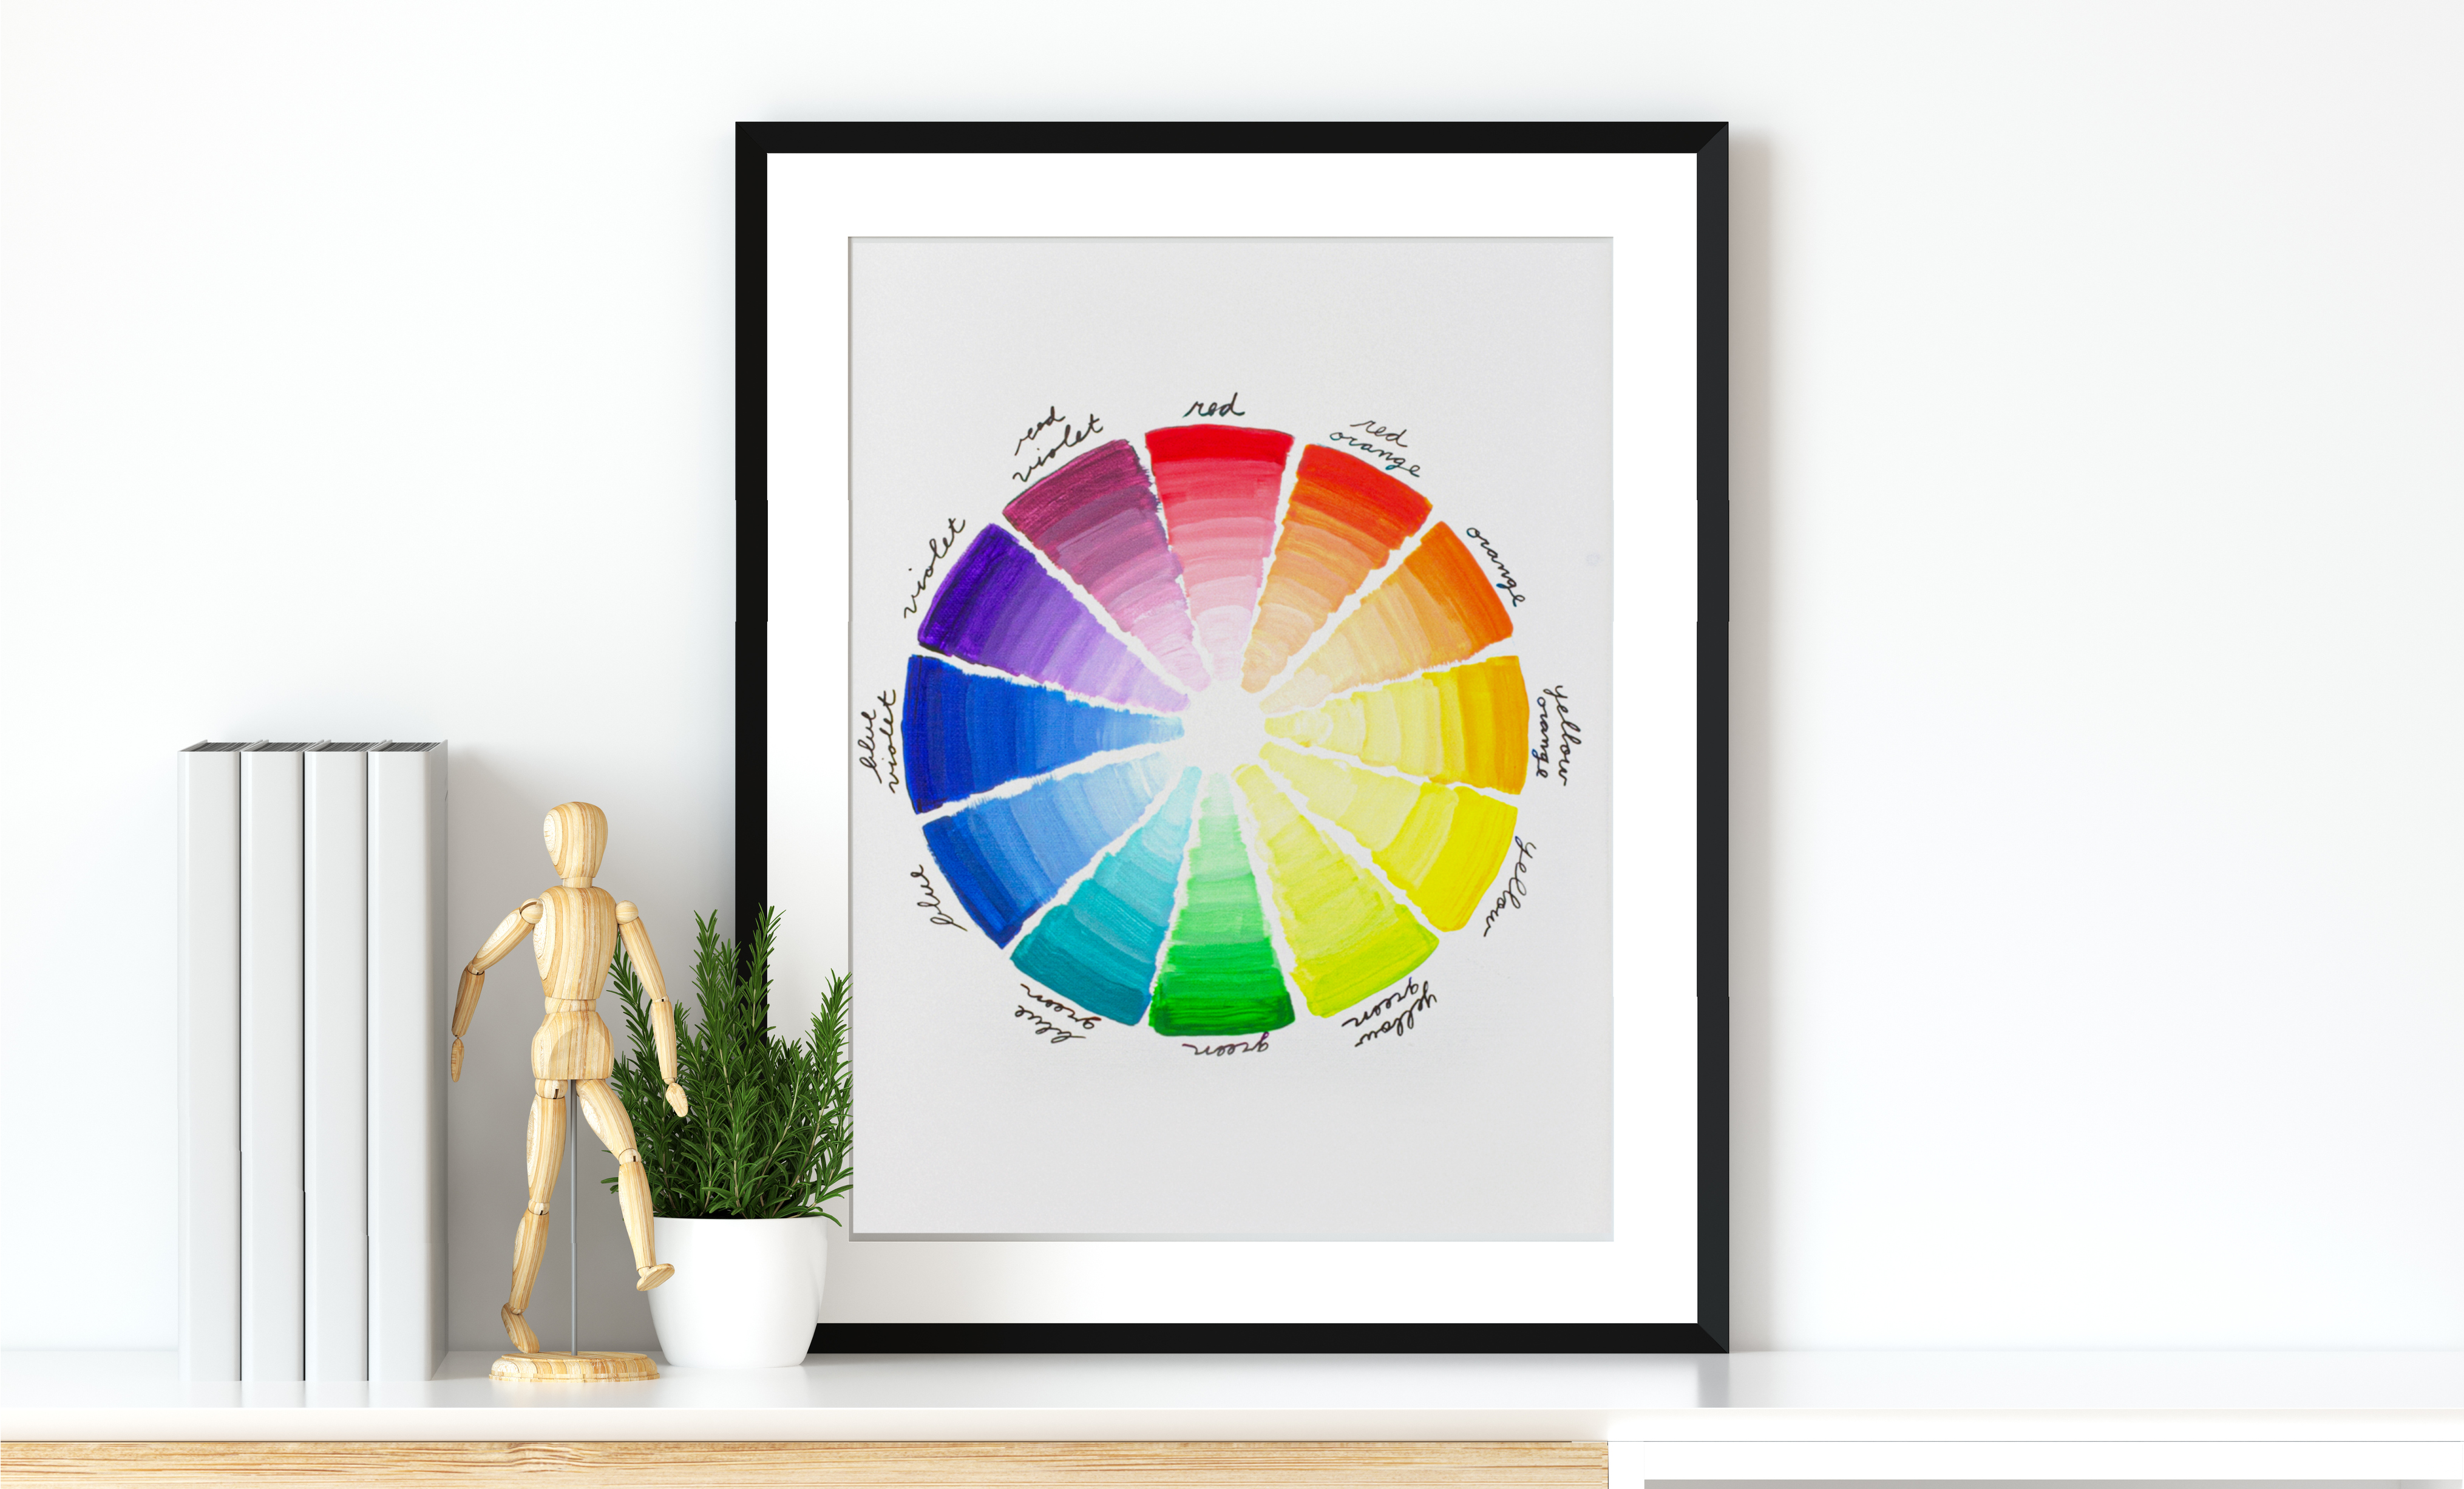 Blog - How to Create a Colour Chart